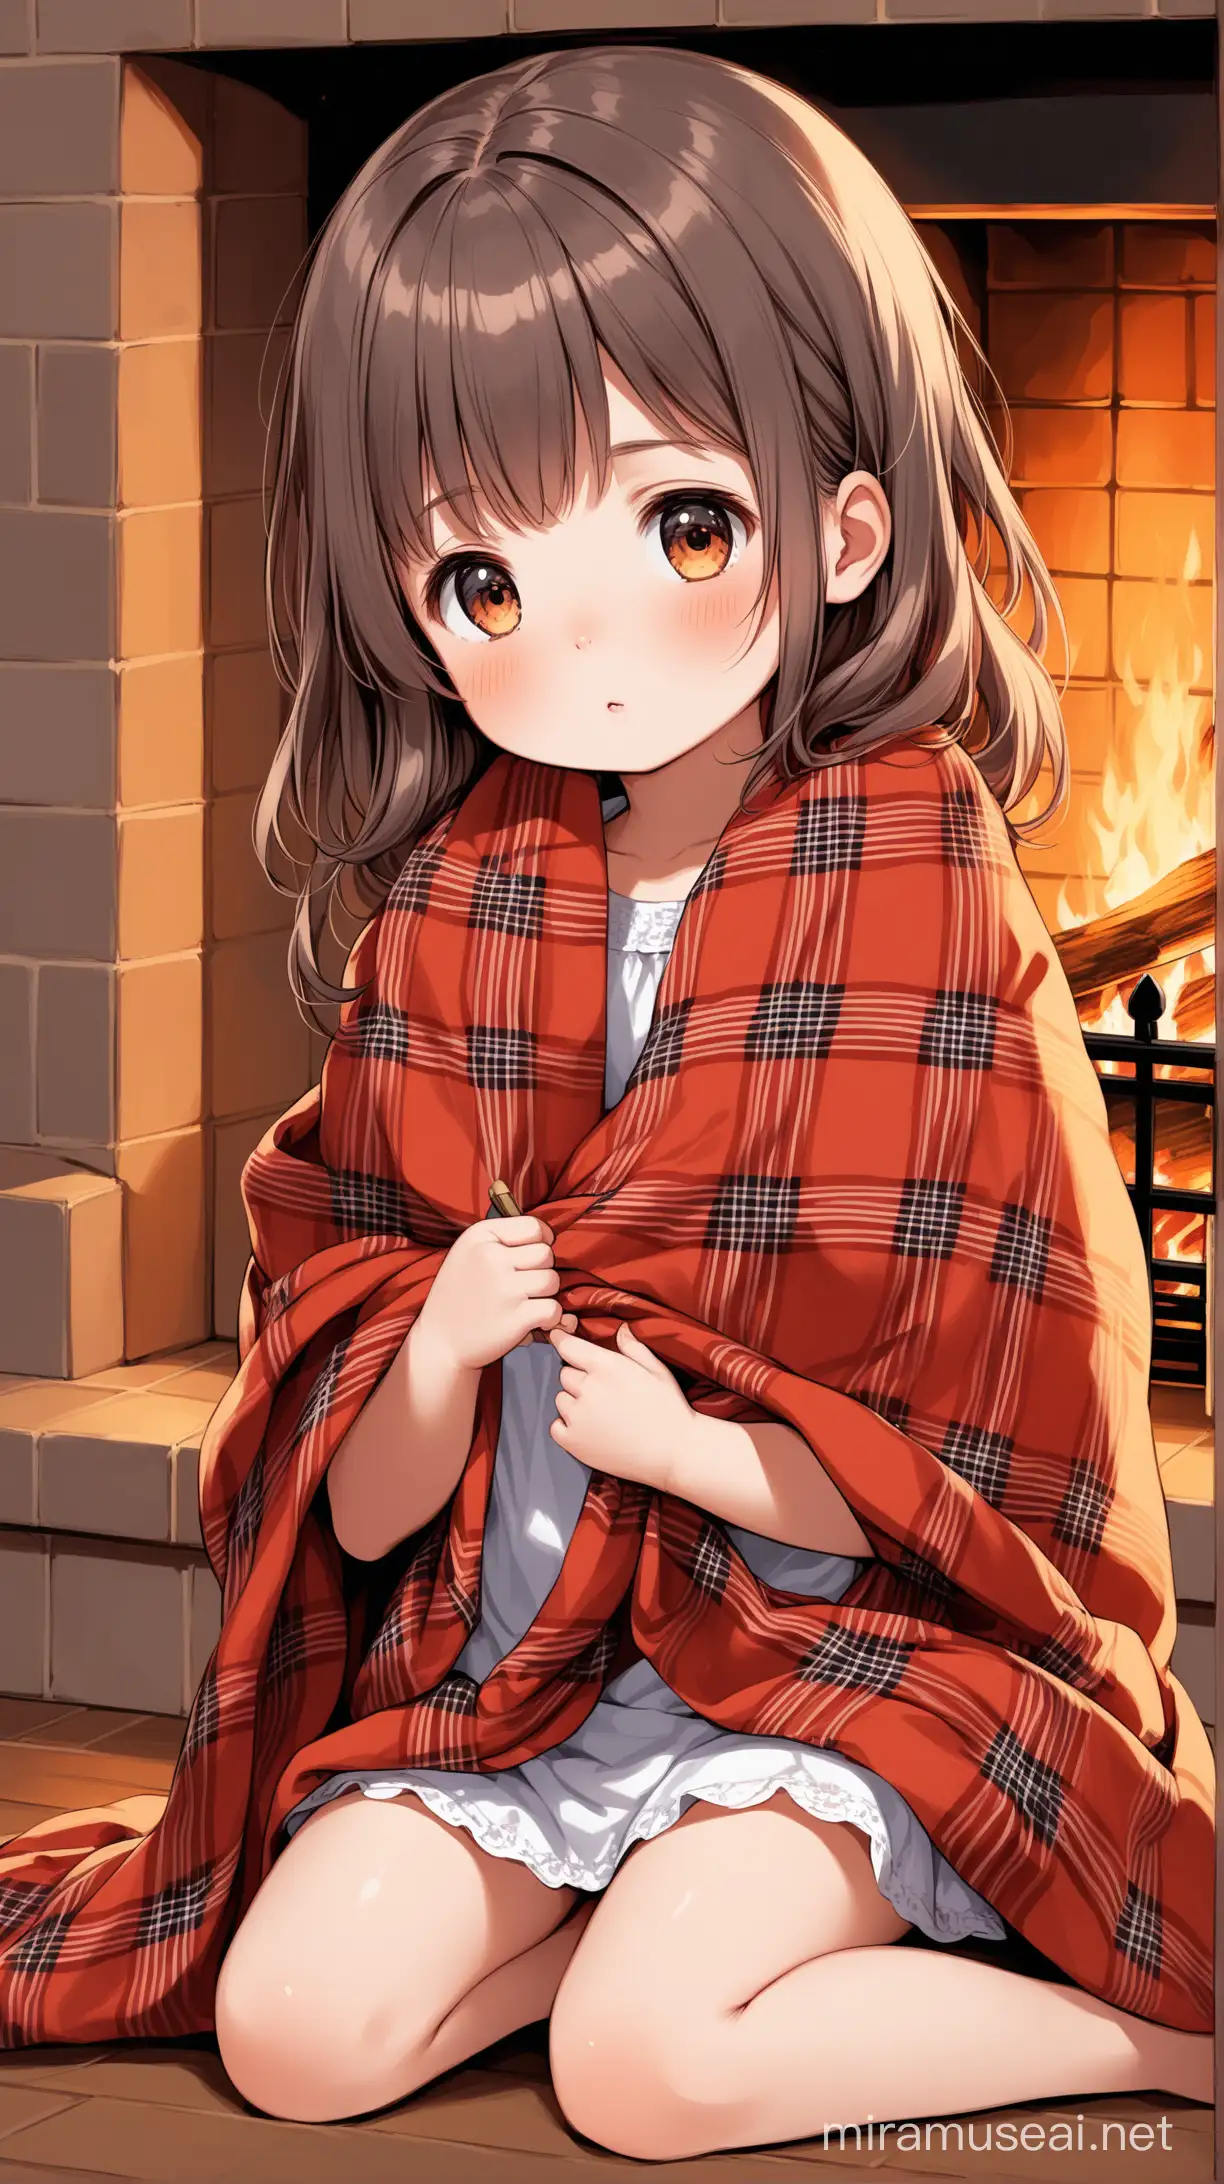 Draw a little girl covered in a plaid blanket looking at the fireplace
